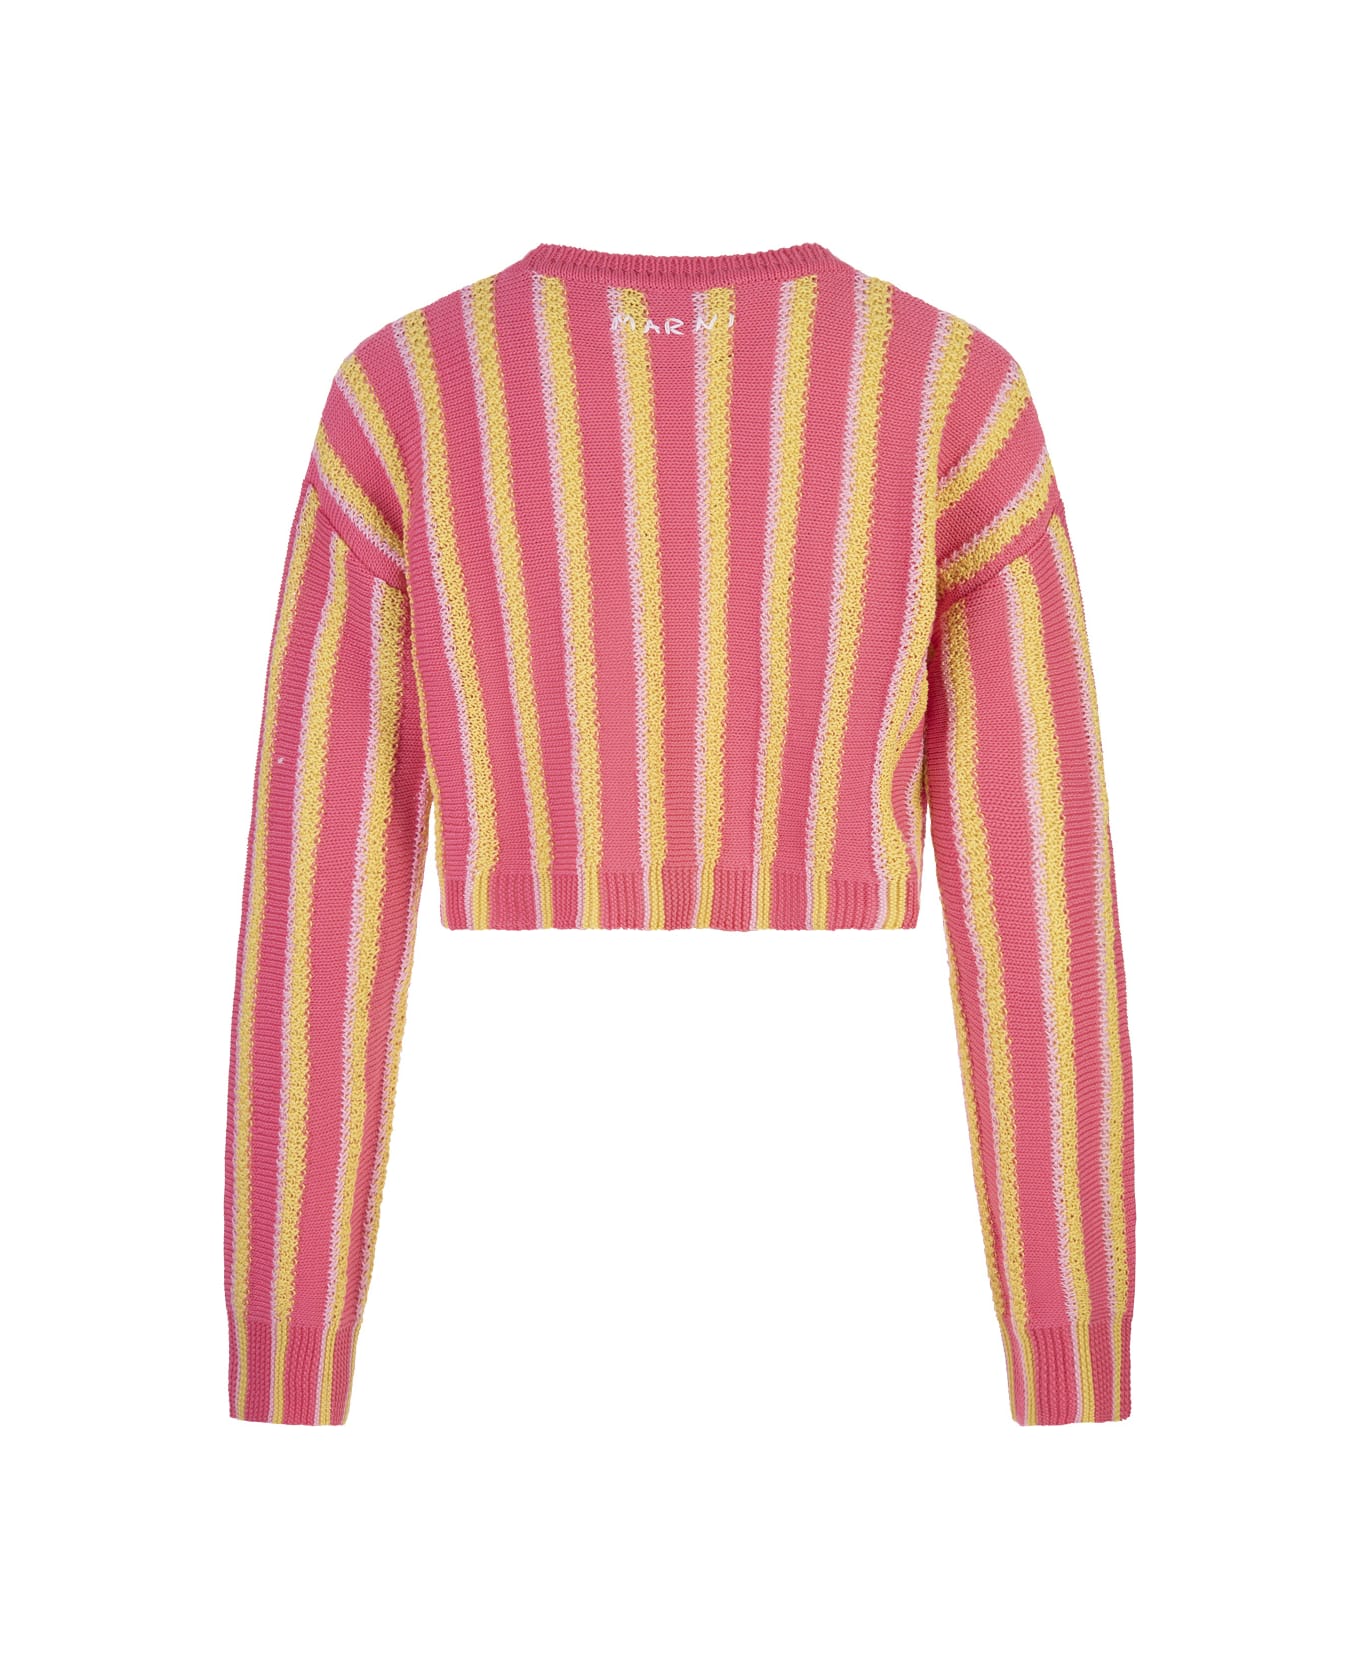 Marni Pink, Yellow And White Striped Knitted Crop Pullover - Pink